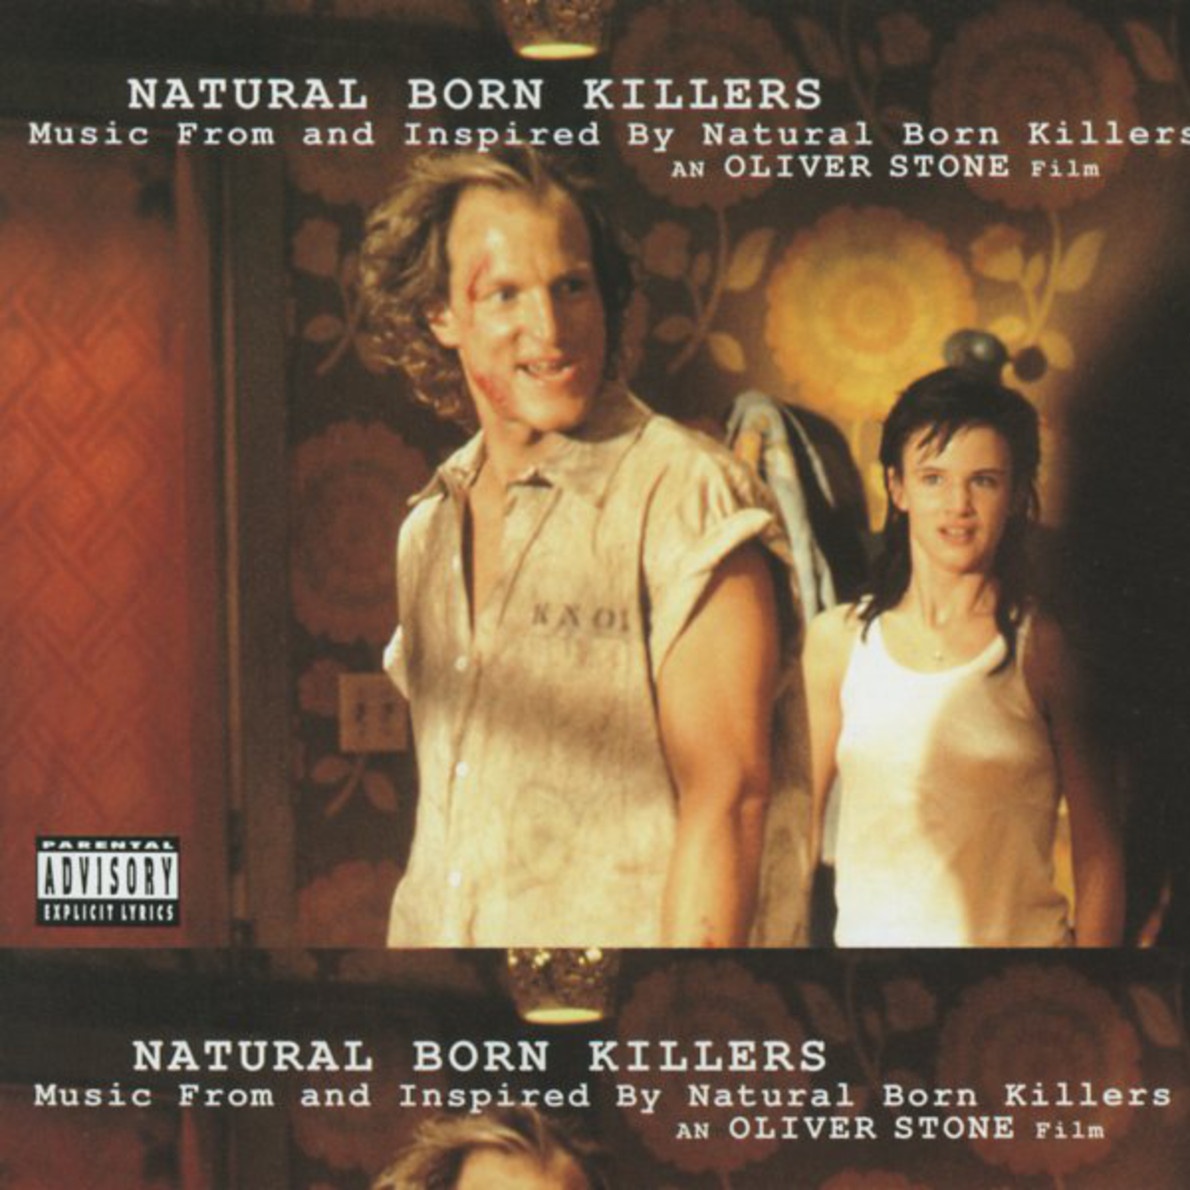 Route 666 - From "Natural Born Killers" Soundtrack